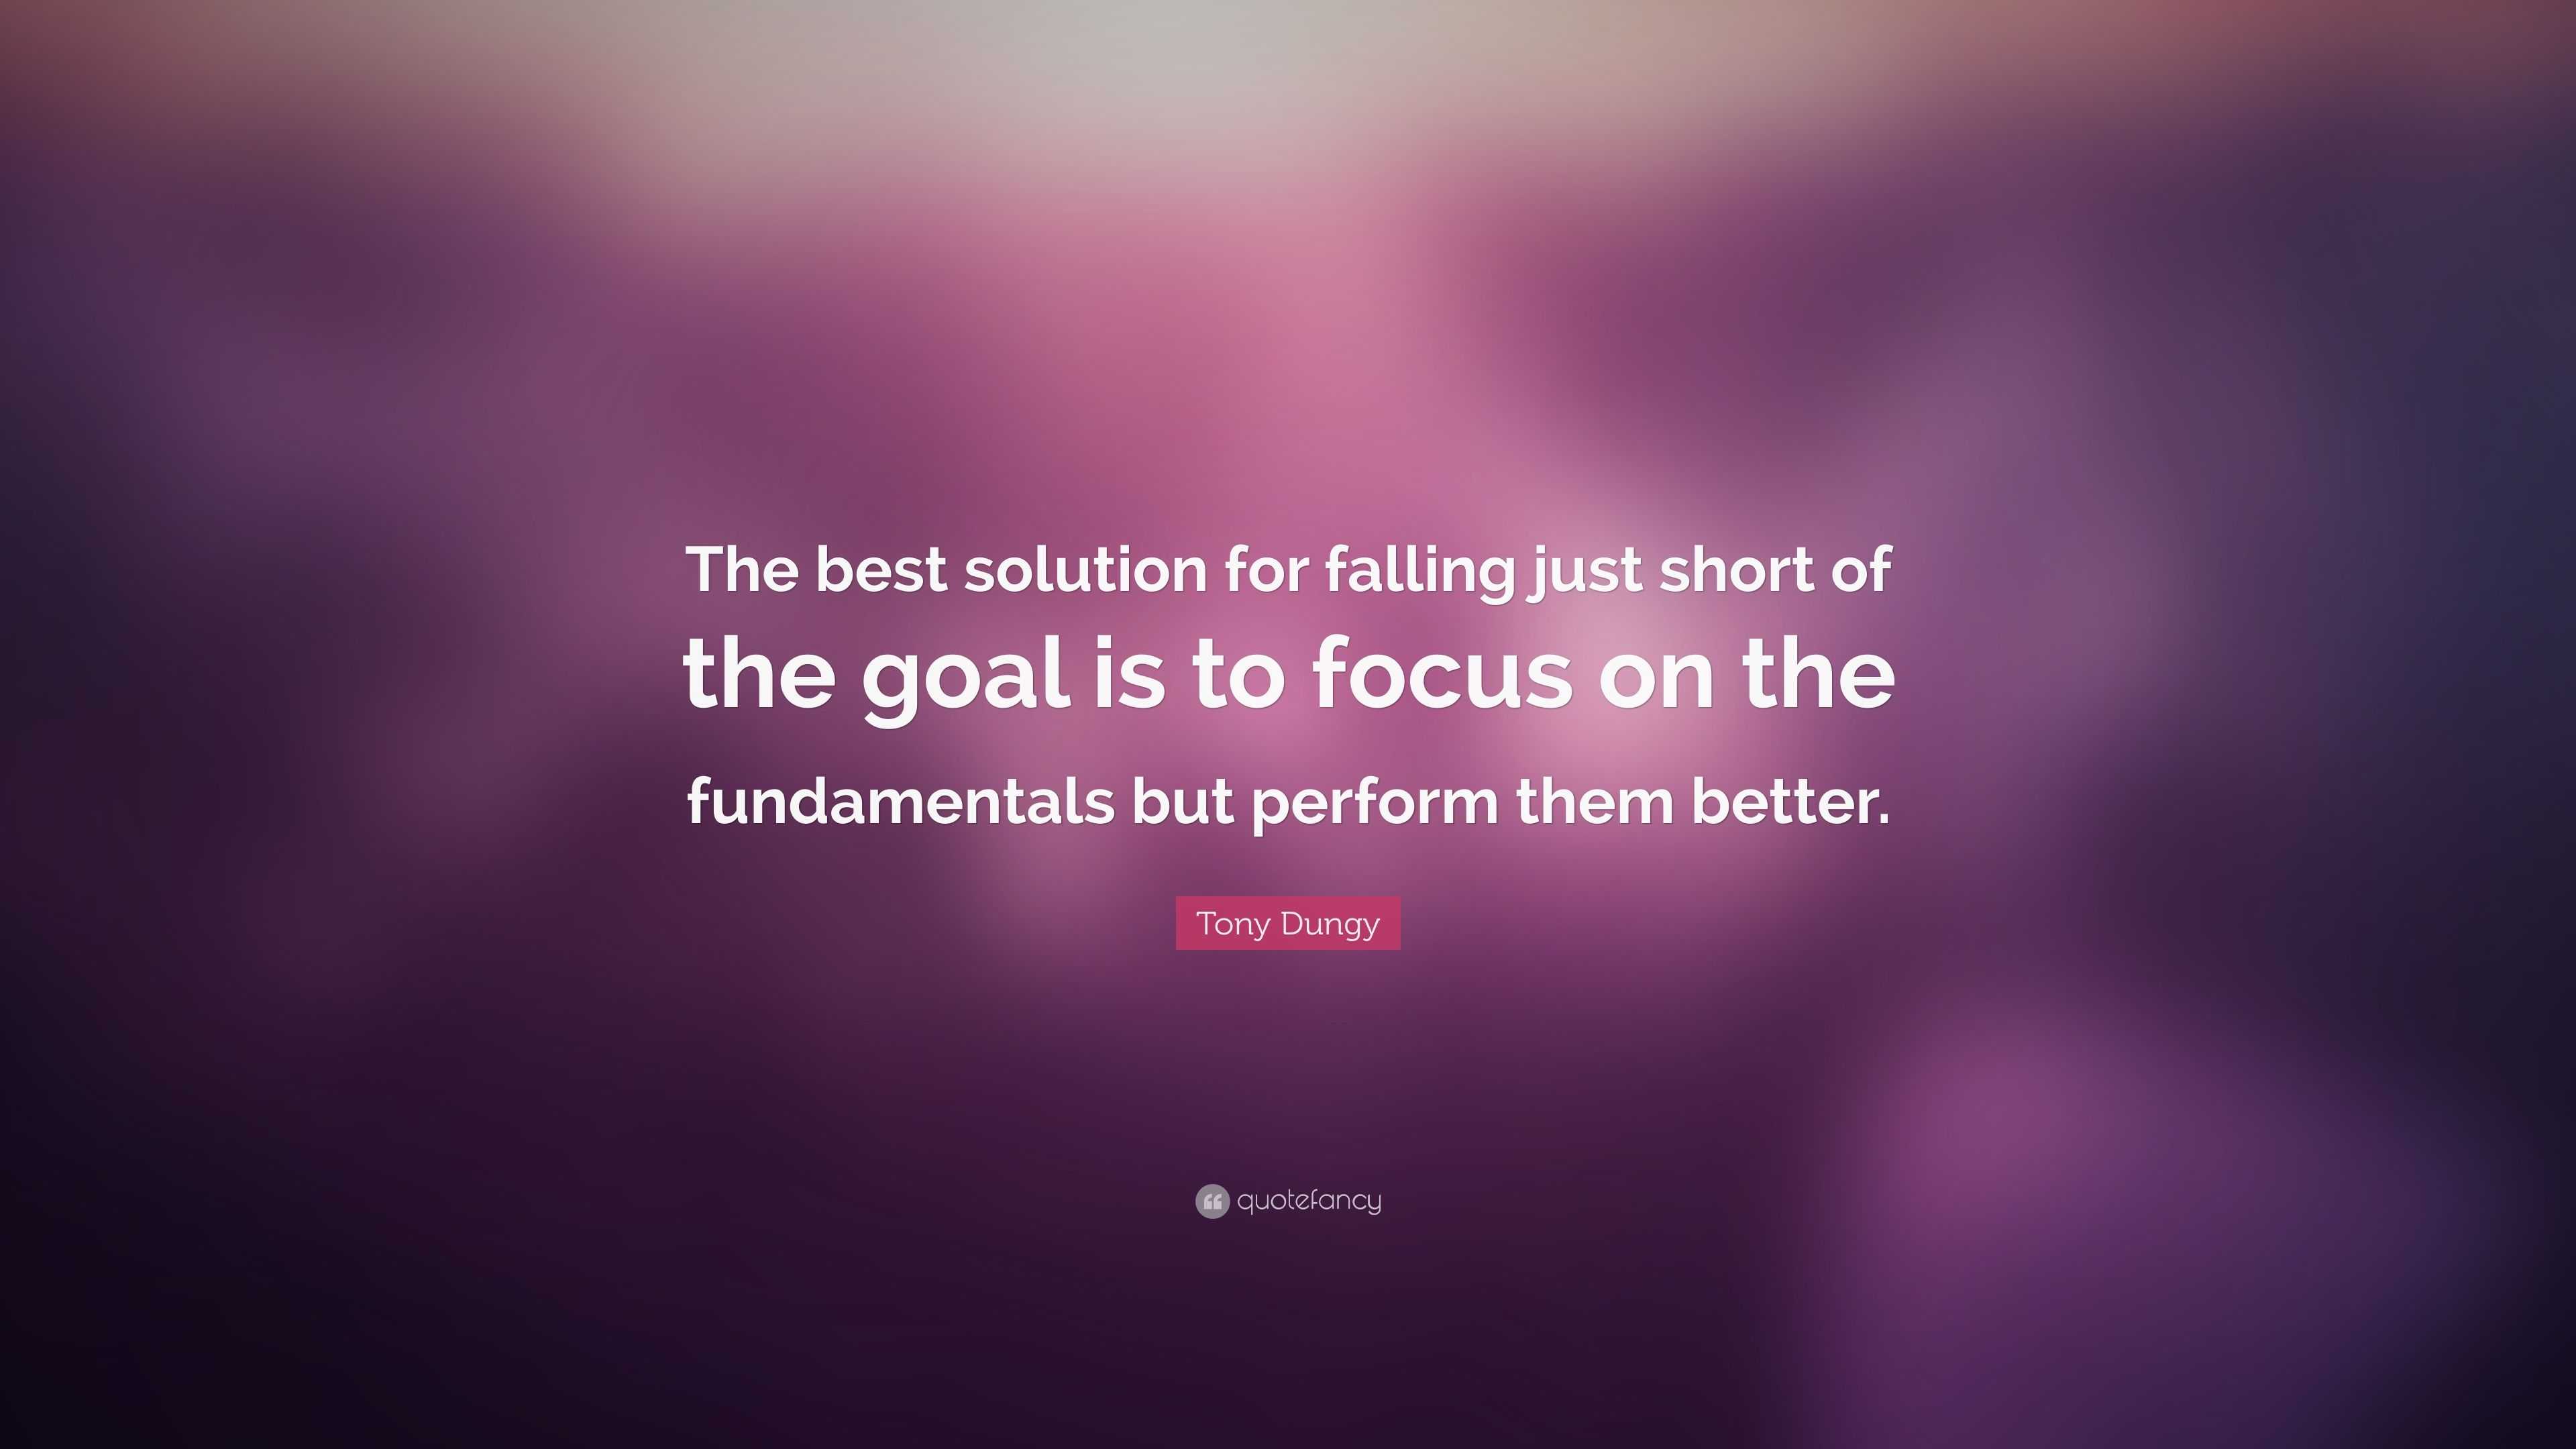 Tony Dungy Quote: “The best solution for falling just short of the goal is  to focus